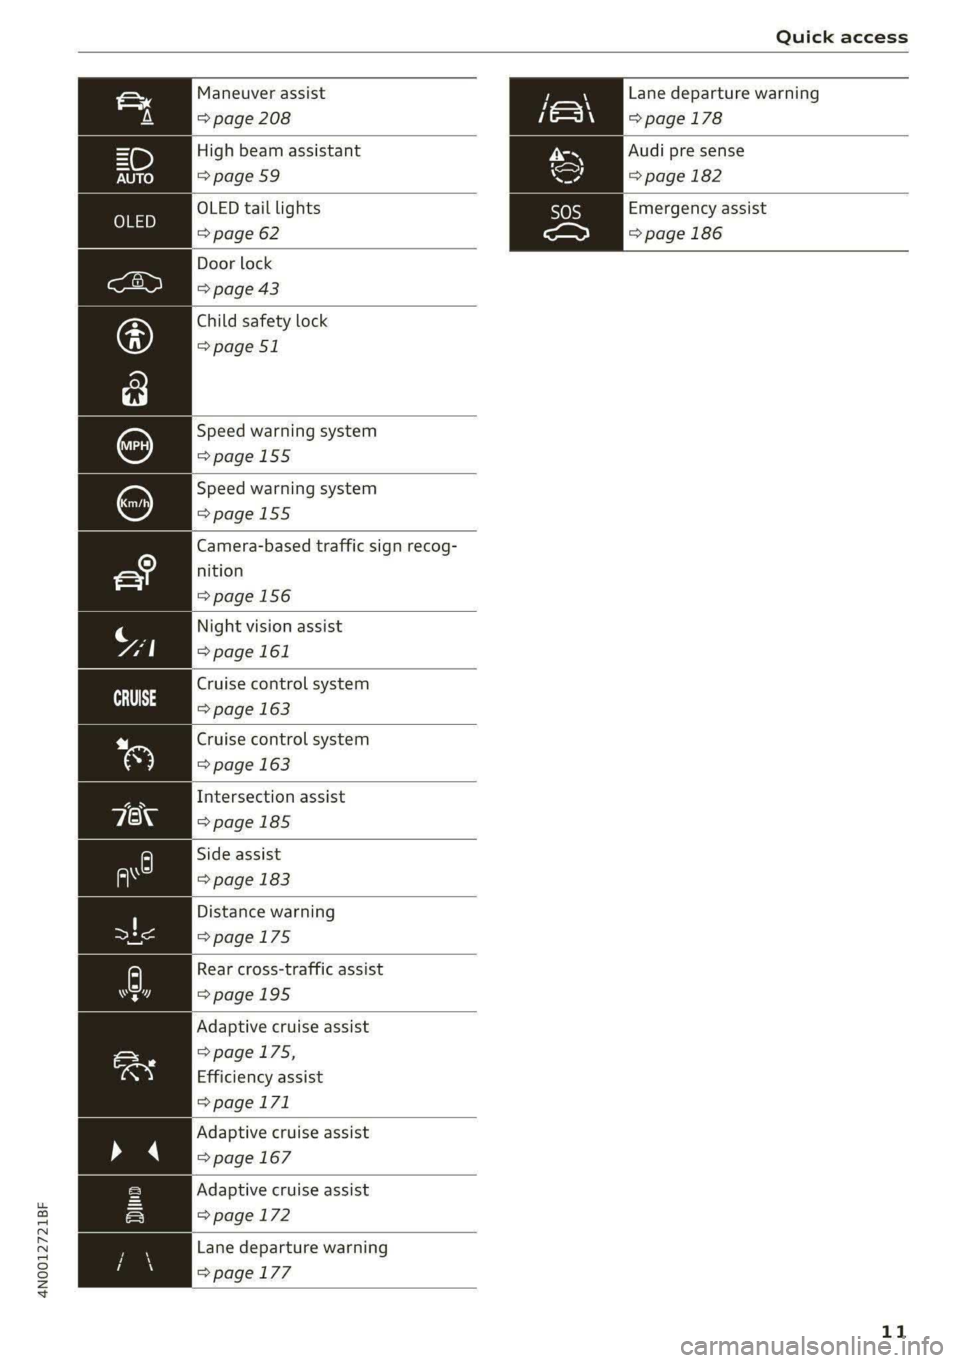 AUDI A8 2021  Owners Manual 4N0012721BF 
Quick access 
  
    
    
   
   
    
   
     
   
     
   
   
     
    
    
   
   
    
   
    
   
   
    
    
High beam assistant 
=>page 59 
OLED tail lights 
=> page 62 
D